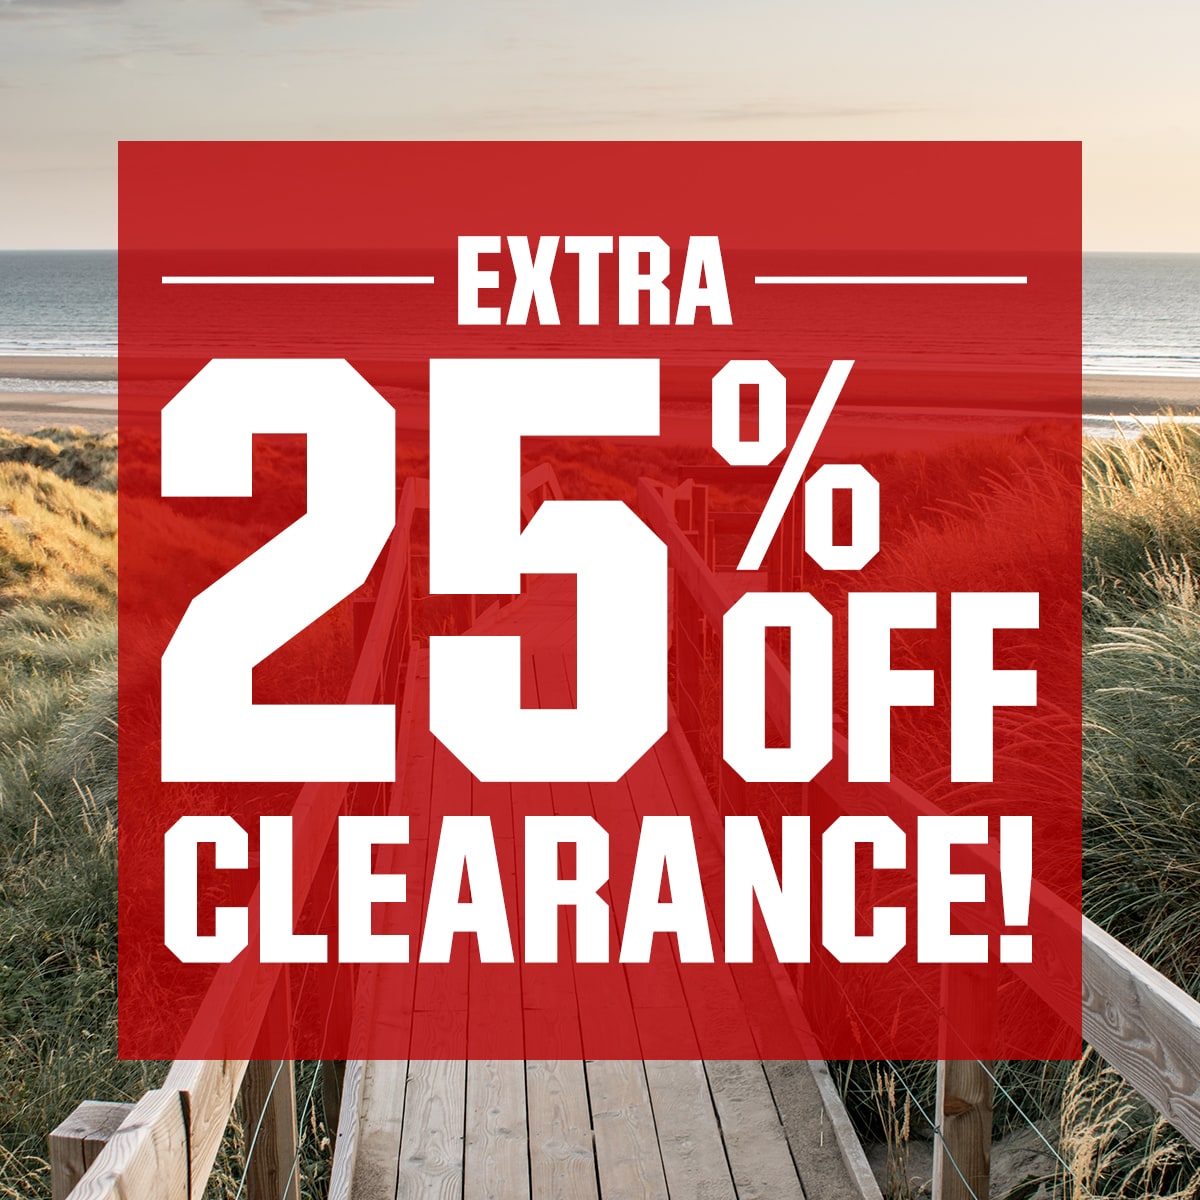 Summer Clearance Sale Starts This Weekend! – Second Gear WNC